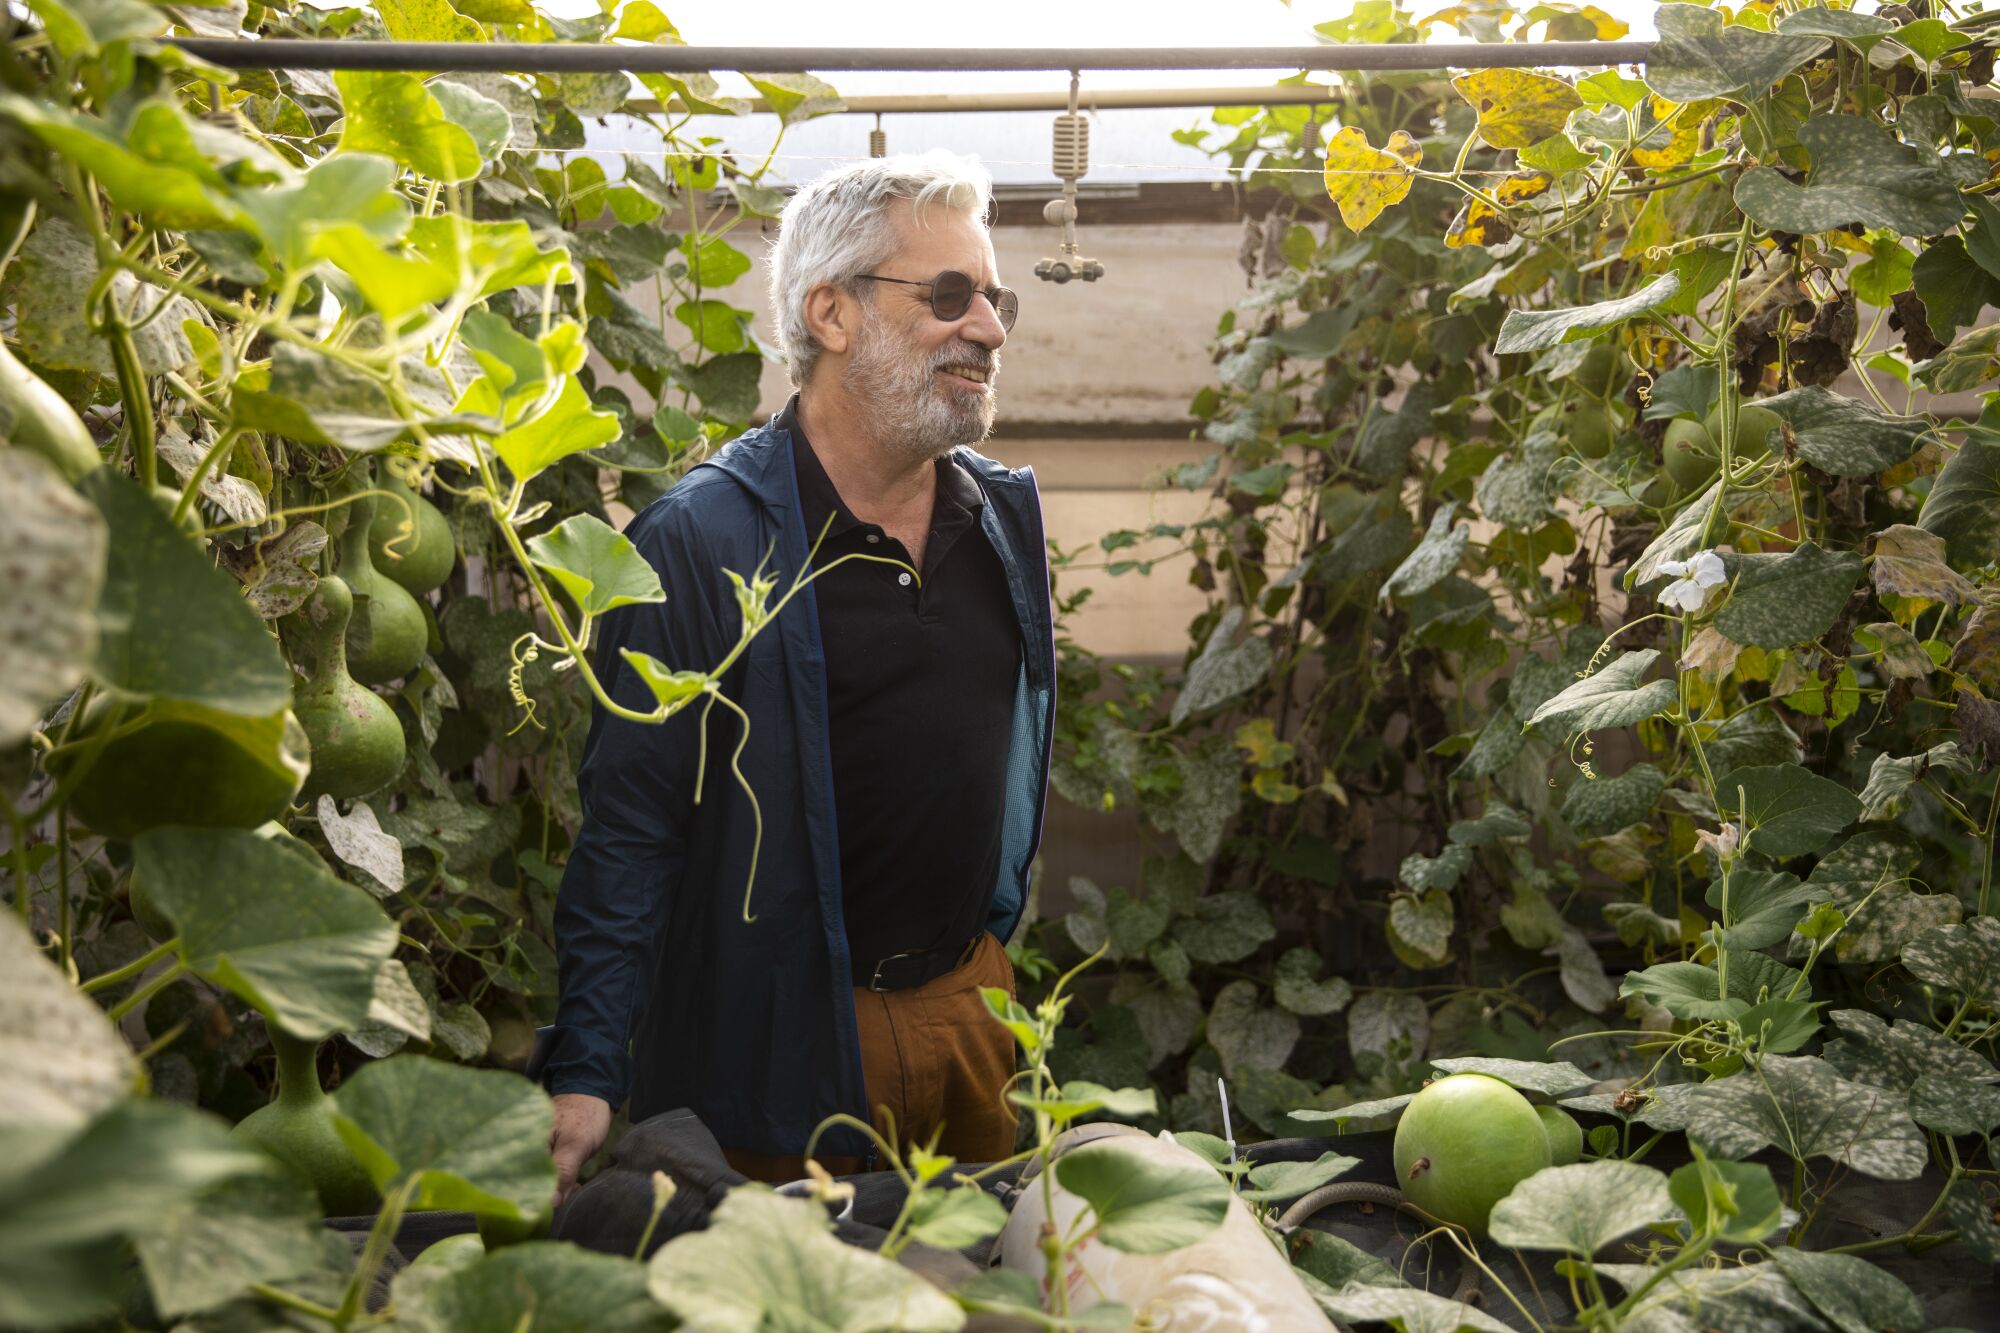 A man in a greenhouse surrounded by gourds and other plants.